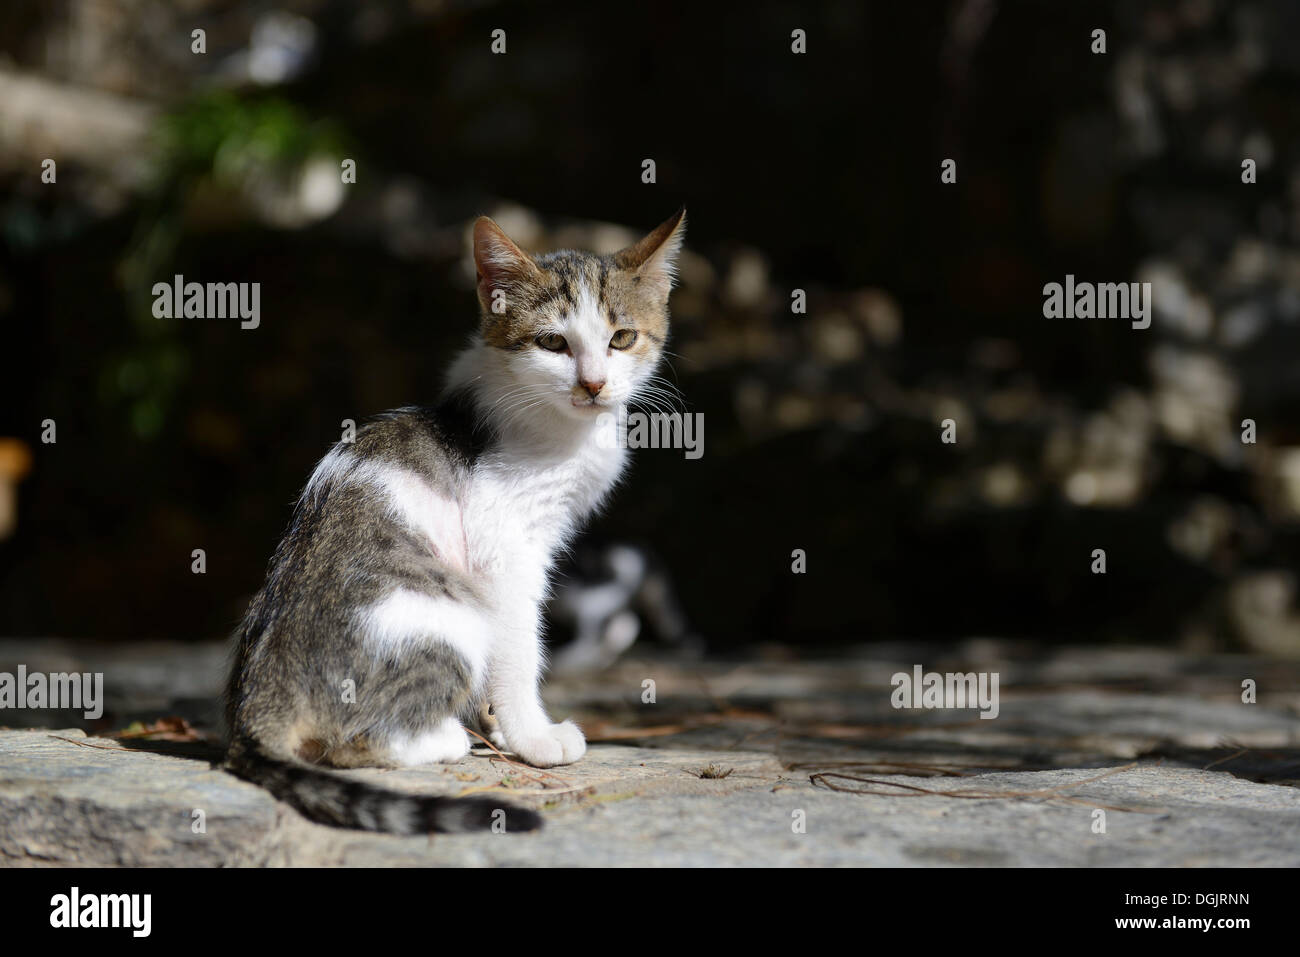 Cat sitting on a stone wall Stock Photo